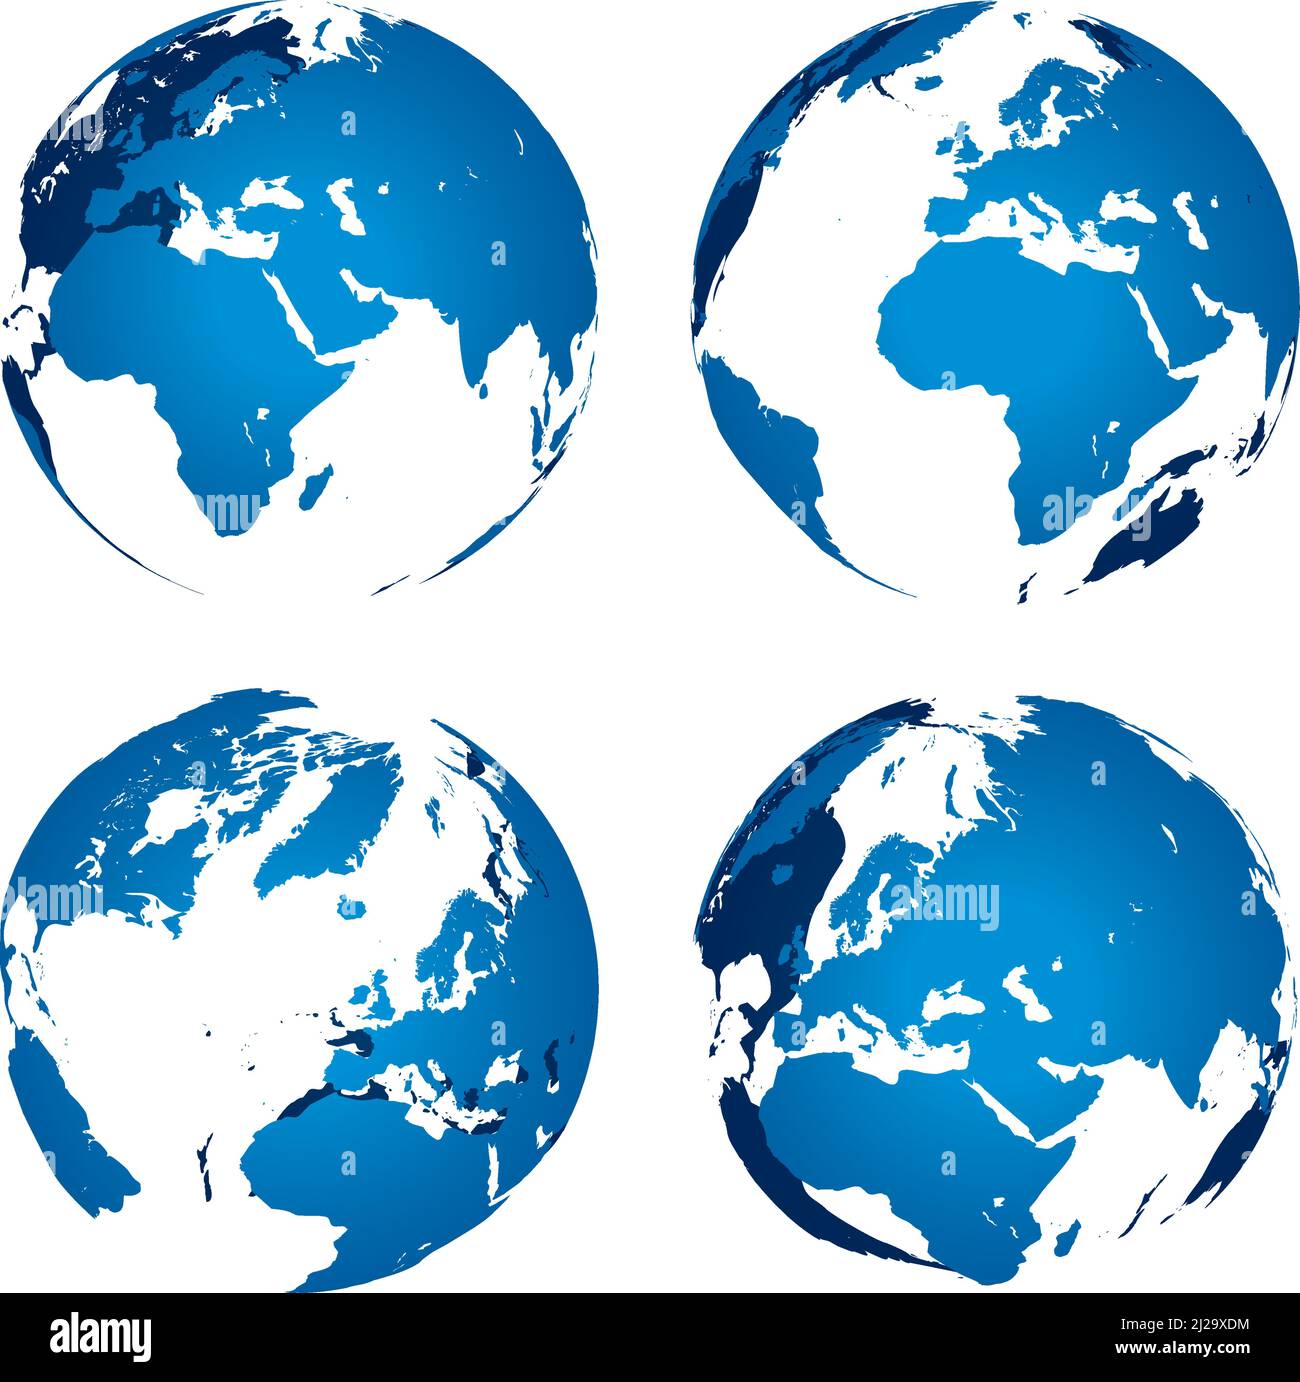 Blue earth globe isolated on white background Stock Vector